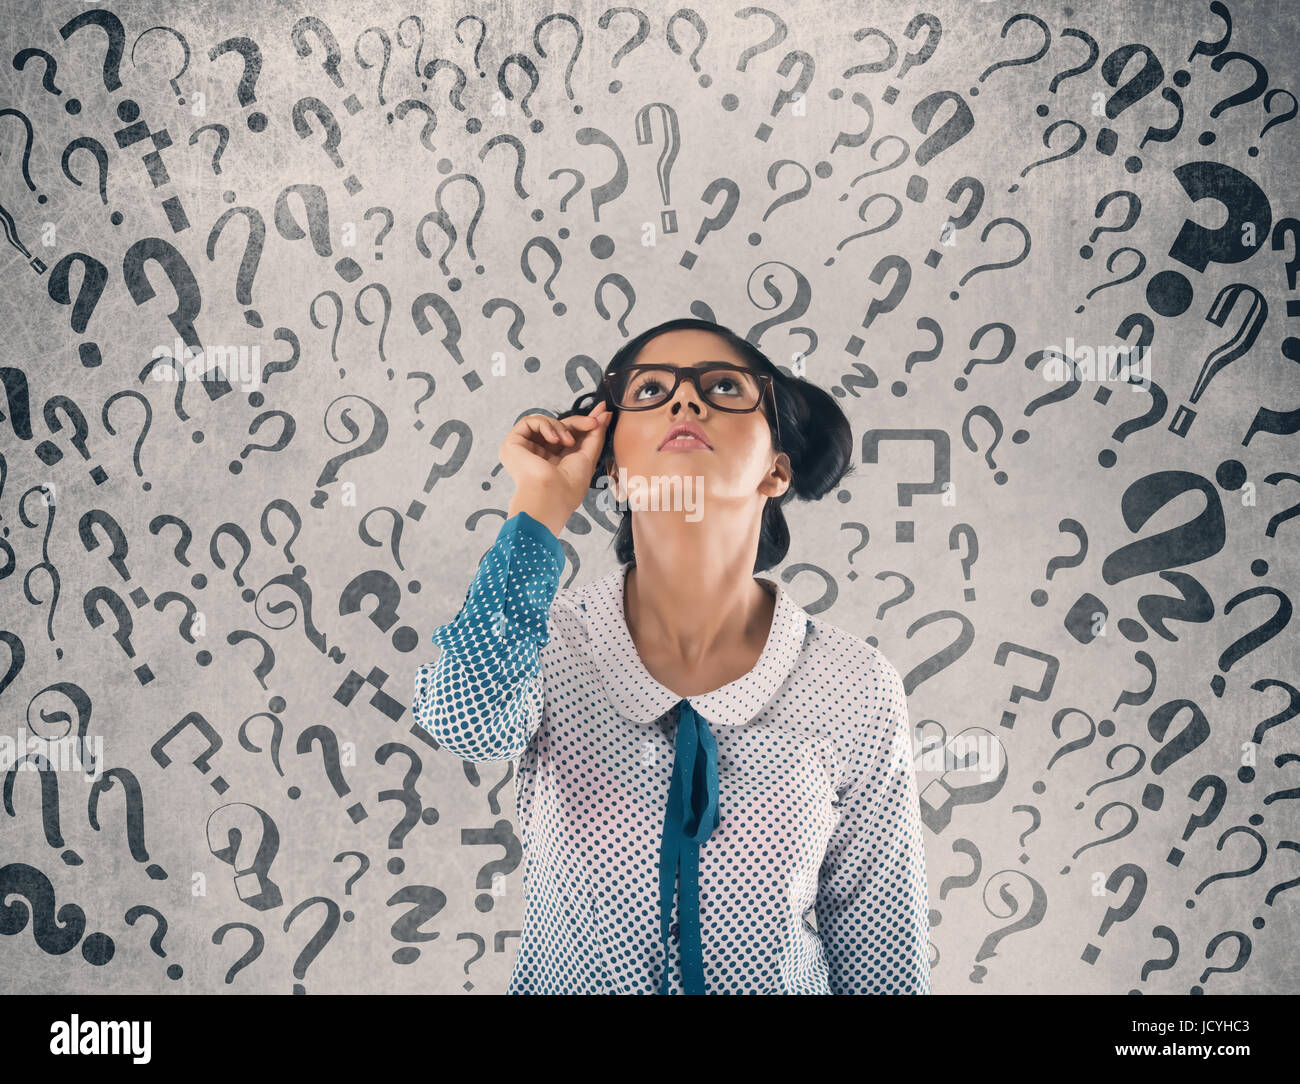 Shocked businessman in front of wall Stock Photo